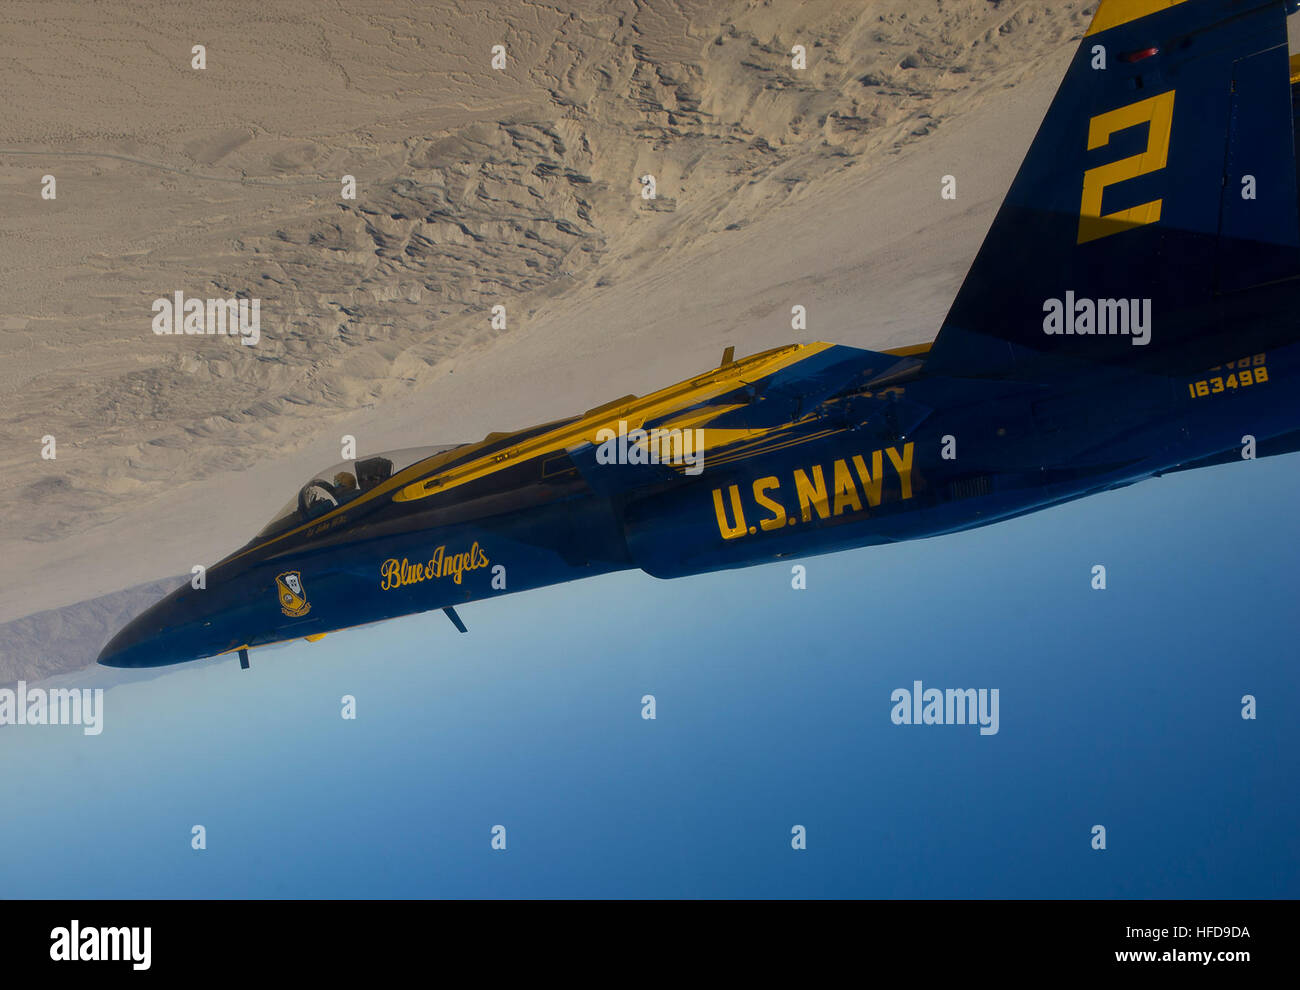 Lt. John Hiltz, from Fort Mitchell, Ky., assigned to the U.S. Navy flight demonstration squadron, the Blue Angels, flies inverted over the desert near Naval Air Facility El Centro, Calif., during a practice flight. The Blue Angels start the 2012 show season at the Naval Air Facility El Centro Air Show March 10. (U.S. Navy photo by: Chief Mass Communication Specialist Russell Tafuri) The Blue Angels fly over El Centro 120224-N-AA791-009 Stock Photo